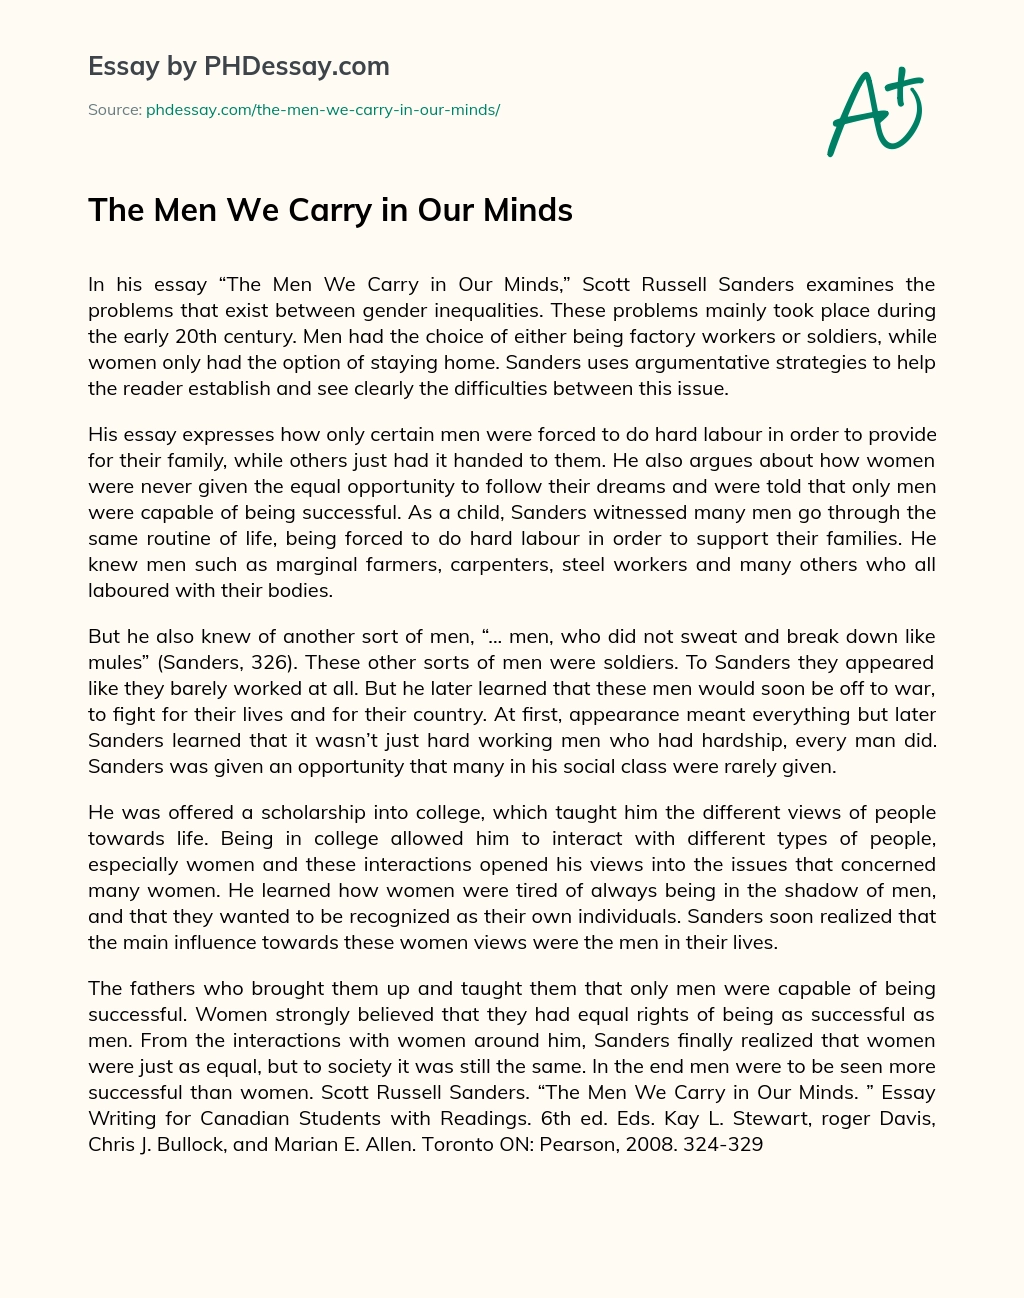 the men we carry in our minds short summary